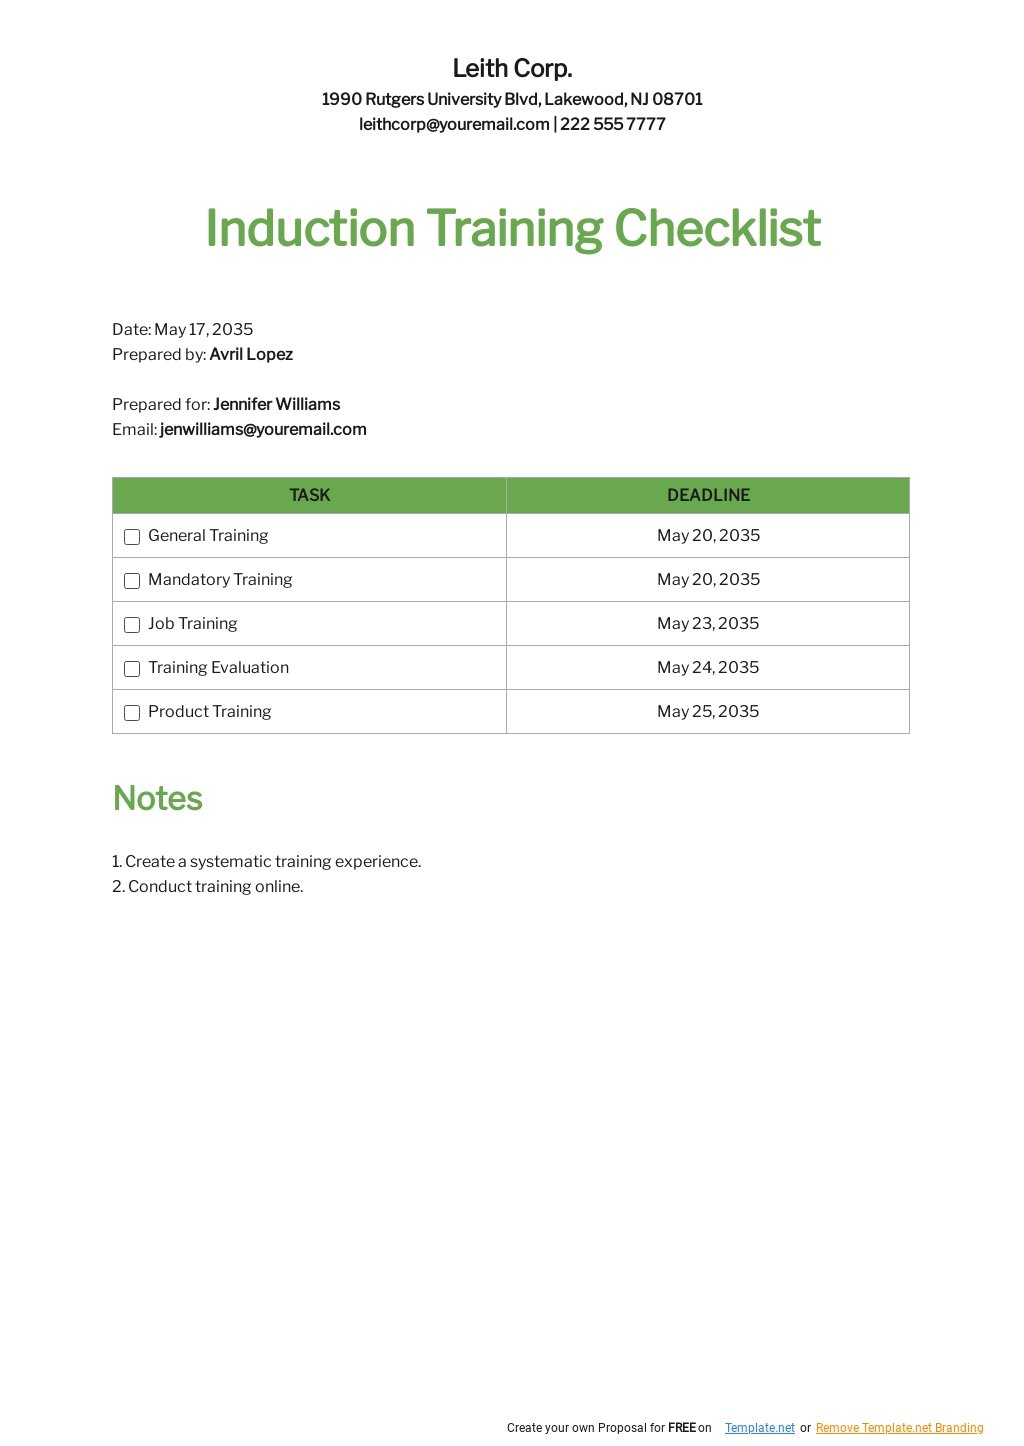 Induction Training Checklist Template